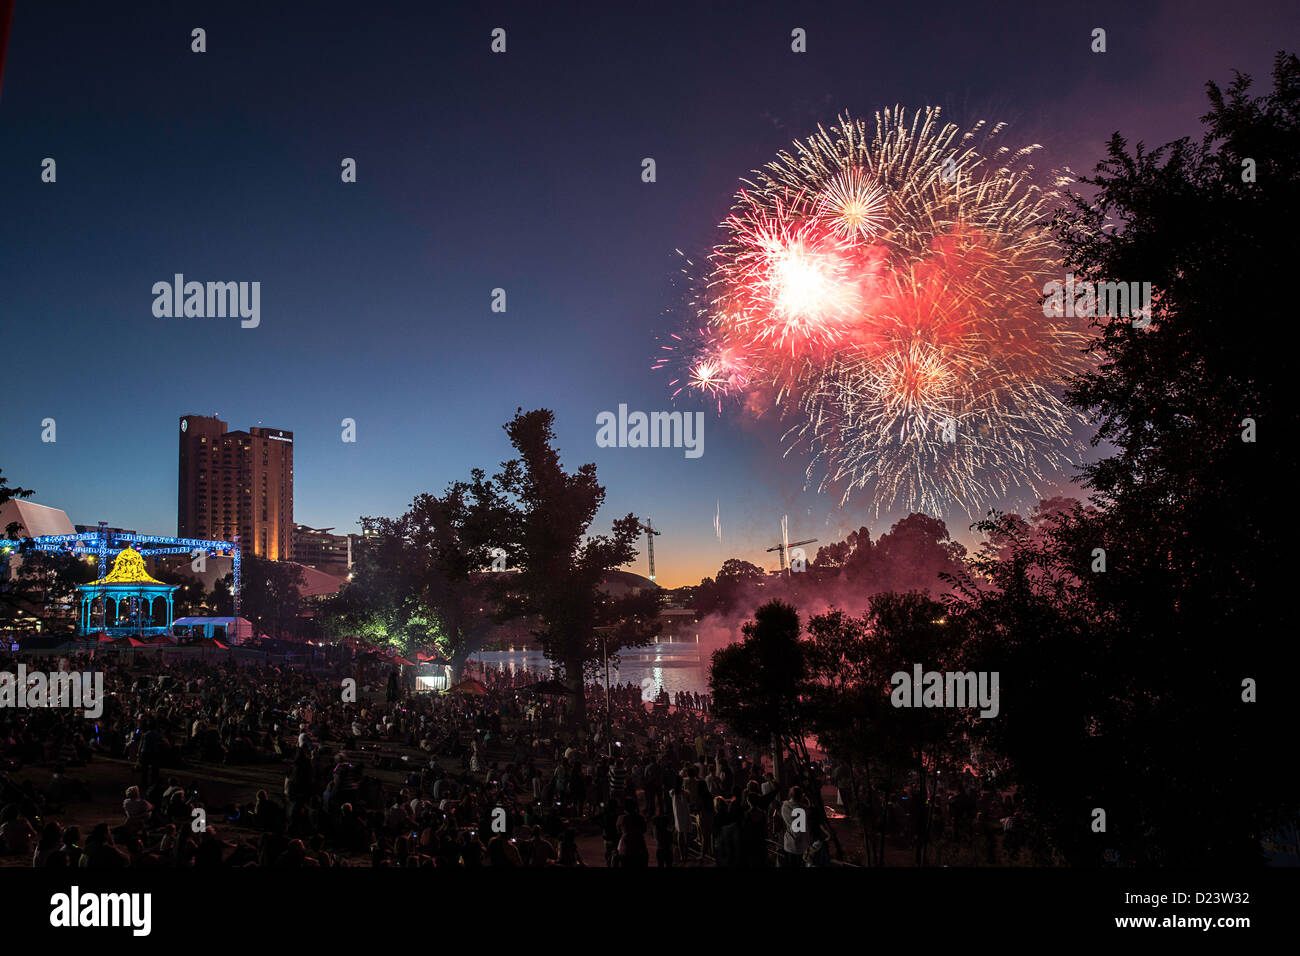 Revellers watch fireworks light up the sky at dusk in the city Stock Photo